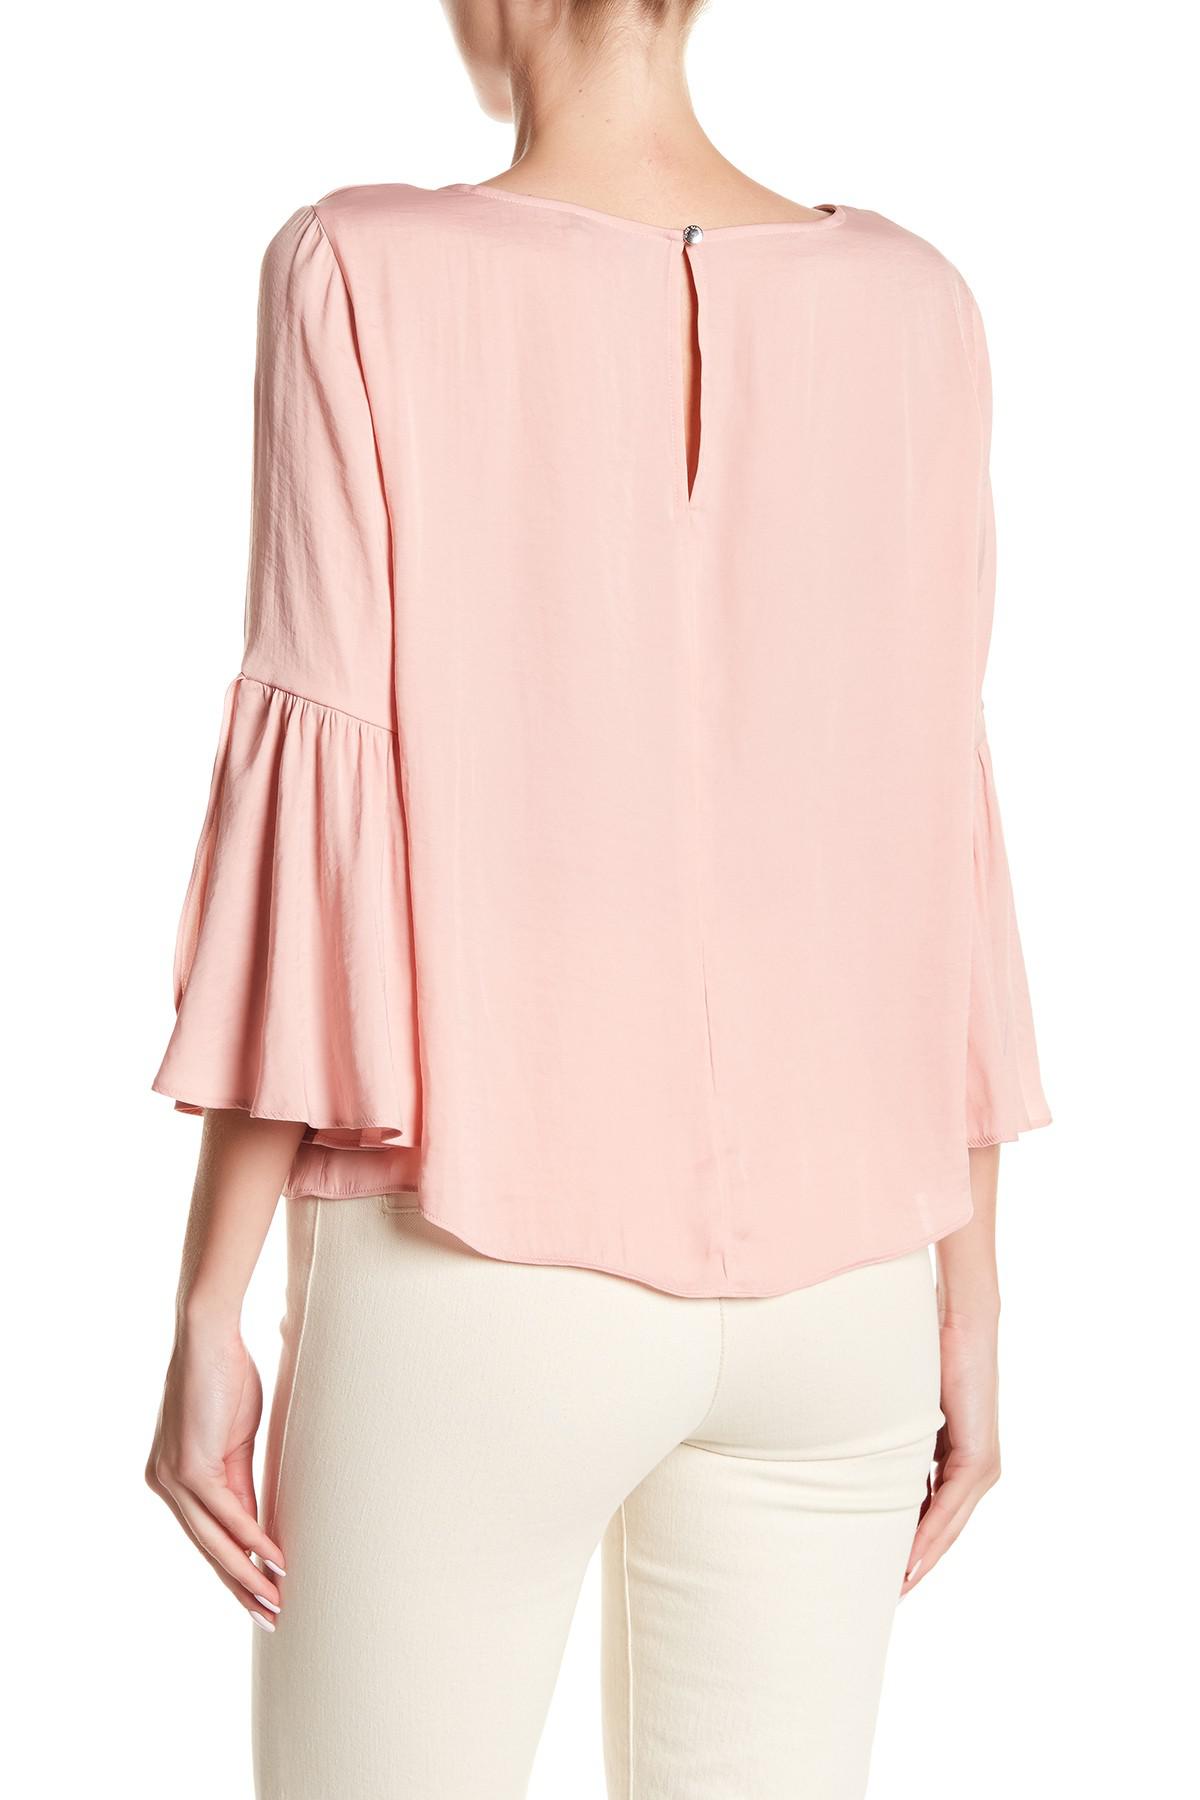 Vince Camuto Hammer Satin Bell Sleeve Blouse in Pink - Lyst